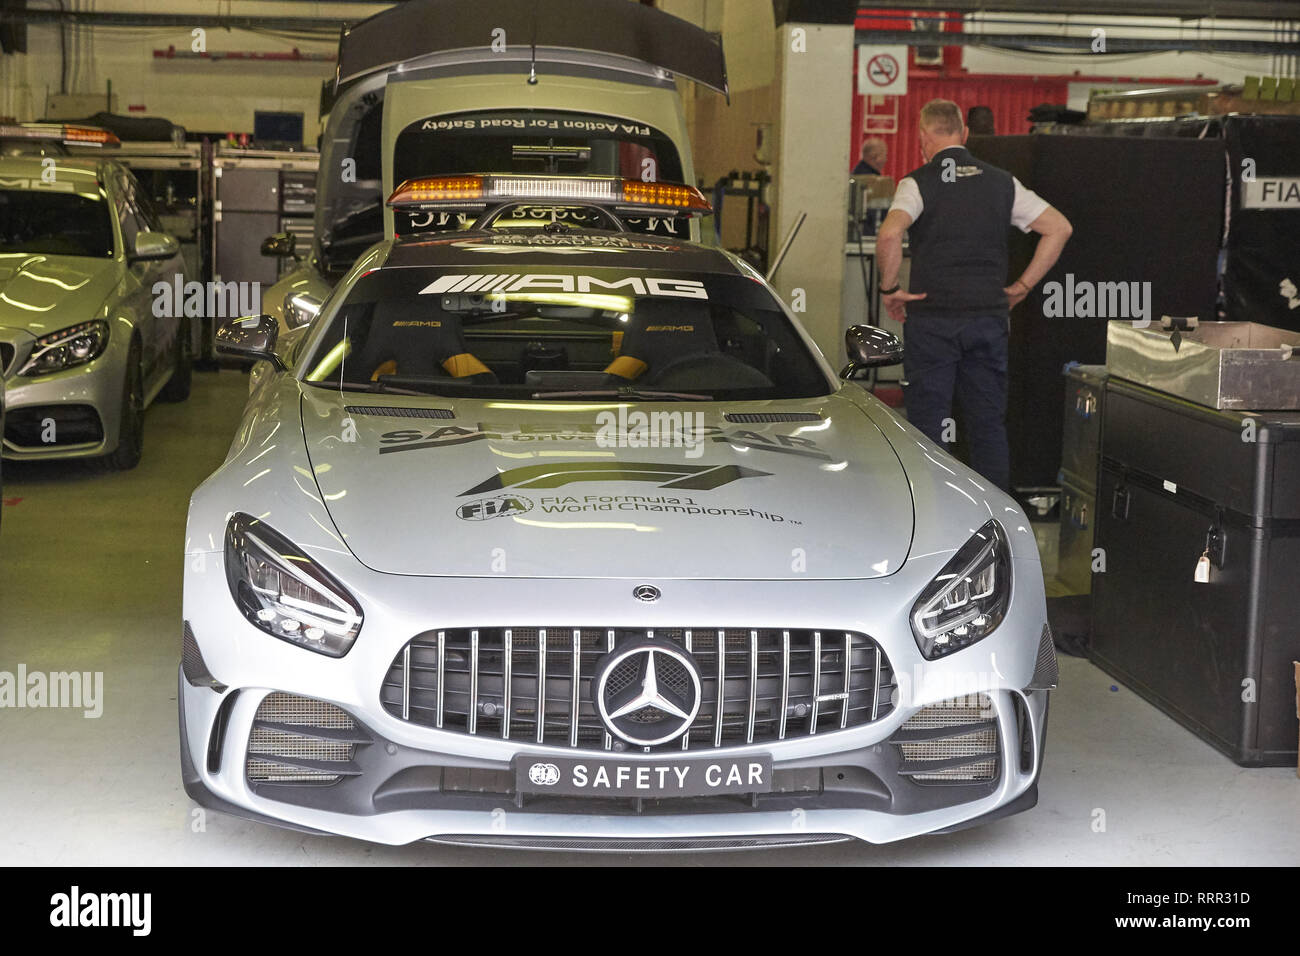 Spain. 26th Feb, 2019. Safety Car seen at the garage of the Pit Line, during the winter testing days at the Circuit de Catalunya in Montmelo Credit: Fernando Pidal/SOPA Images/ZUMA Wire/Alamy Live News Stock Photo